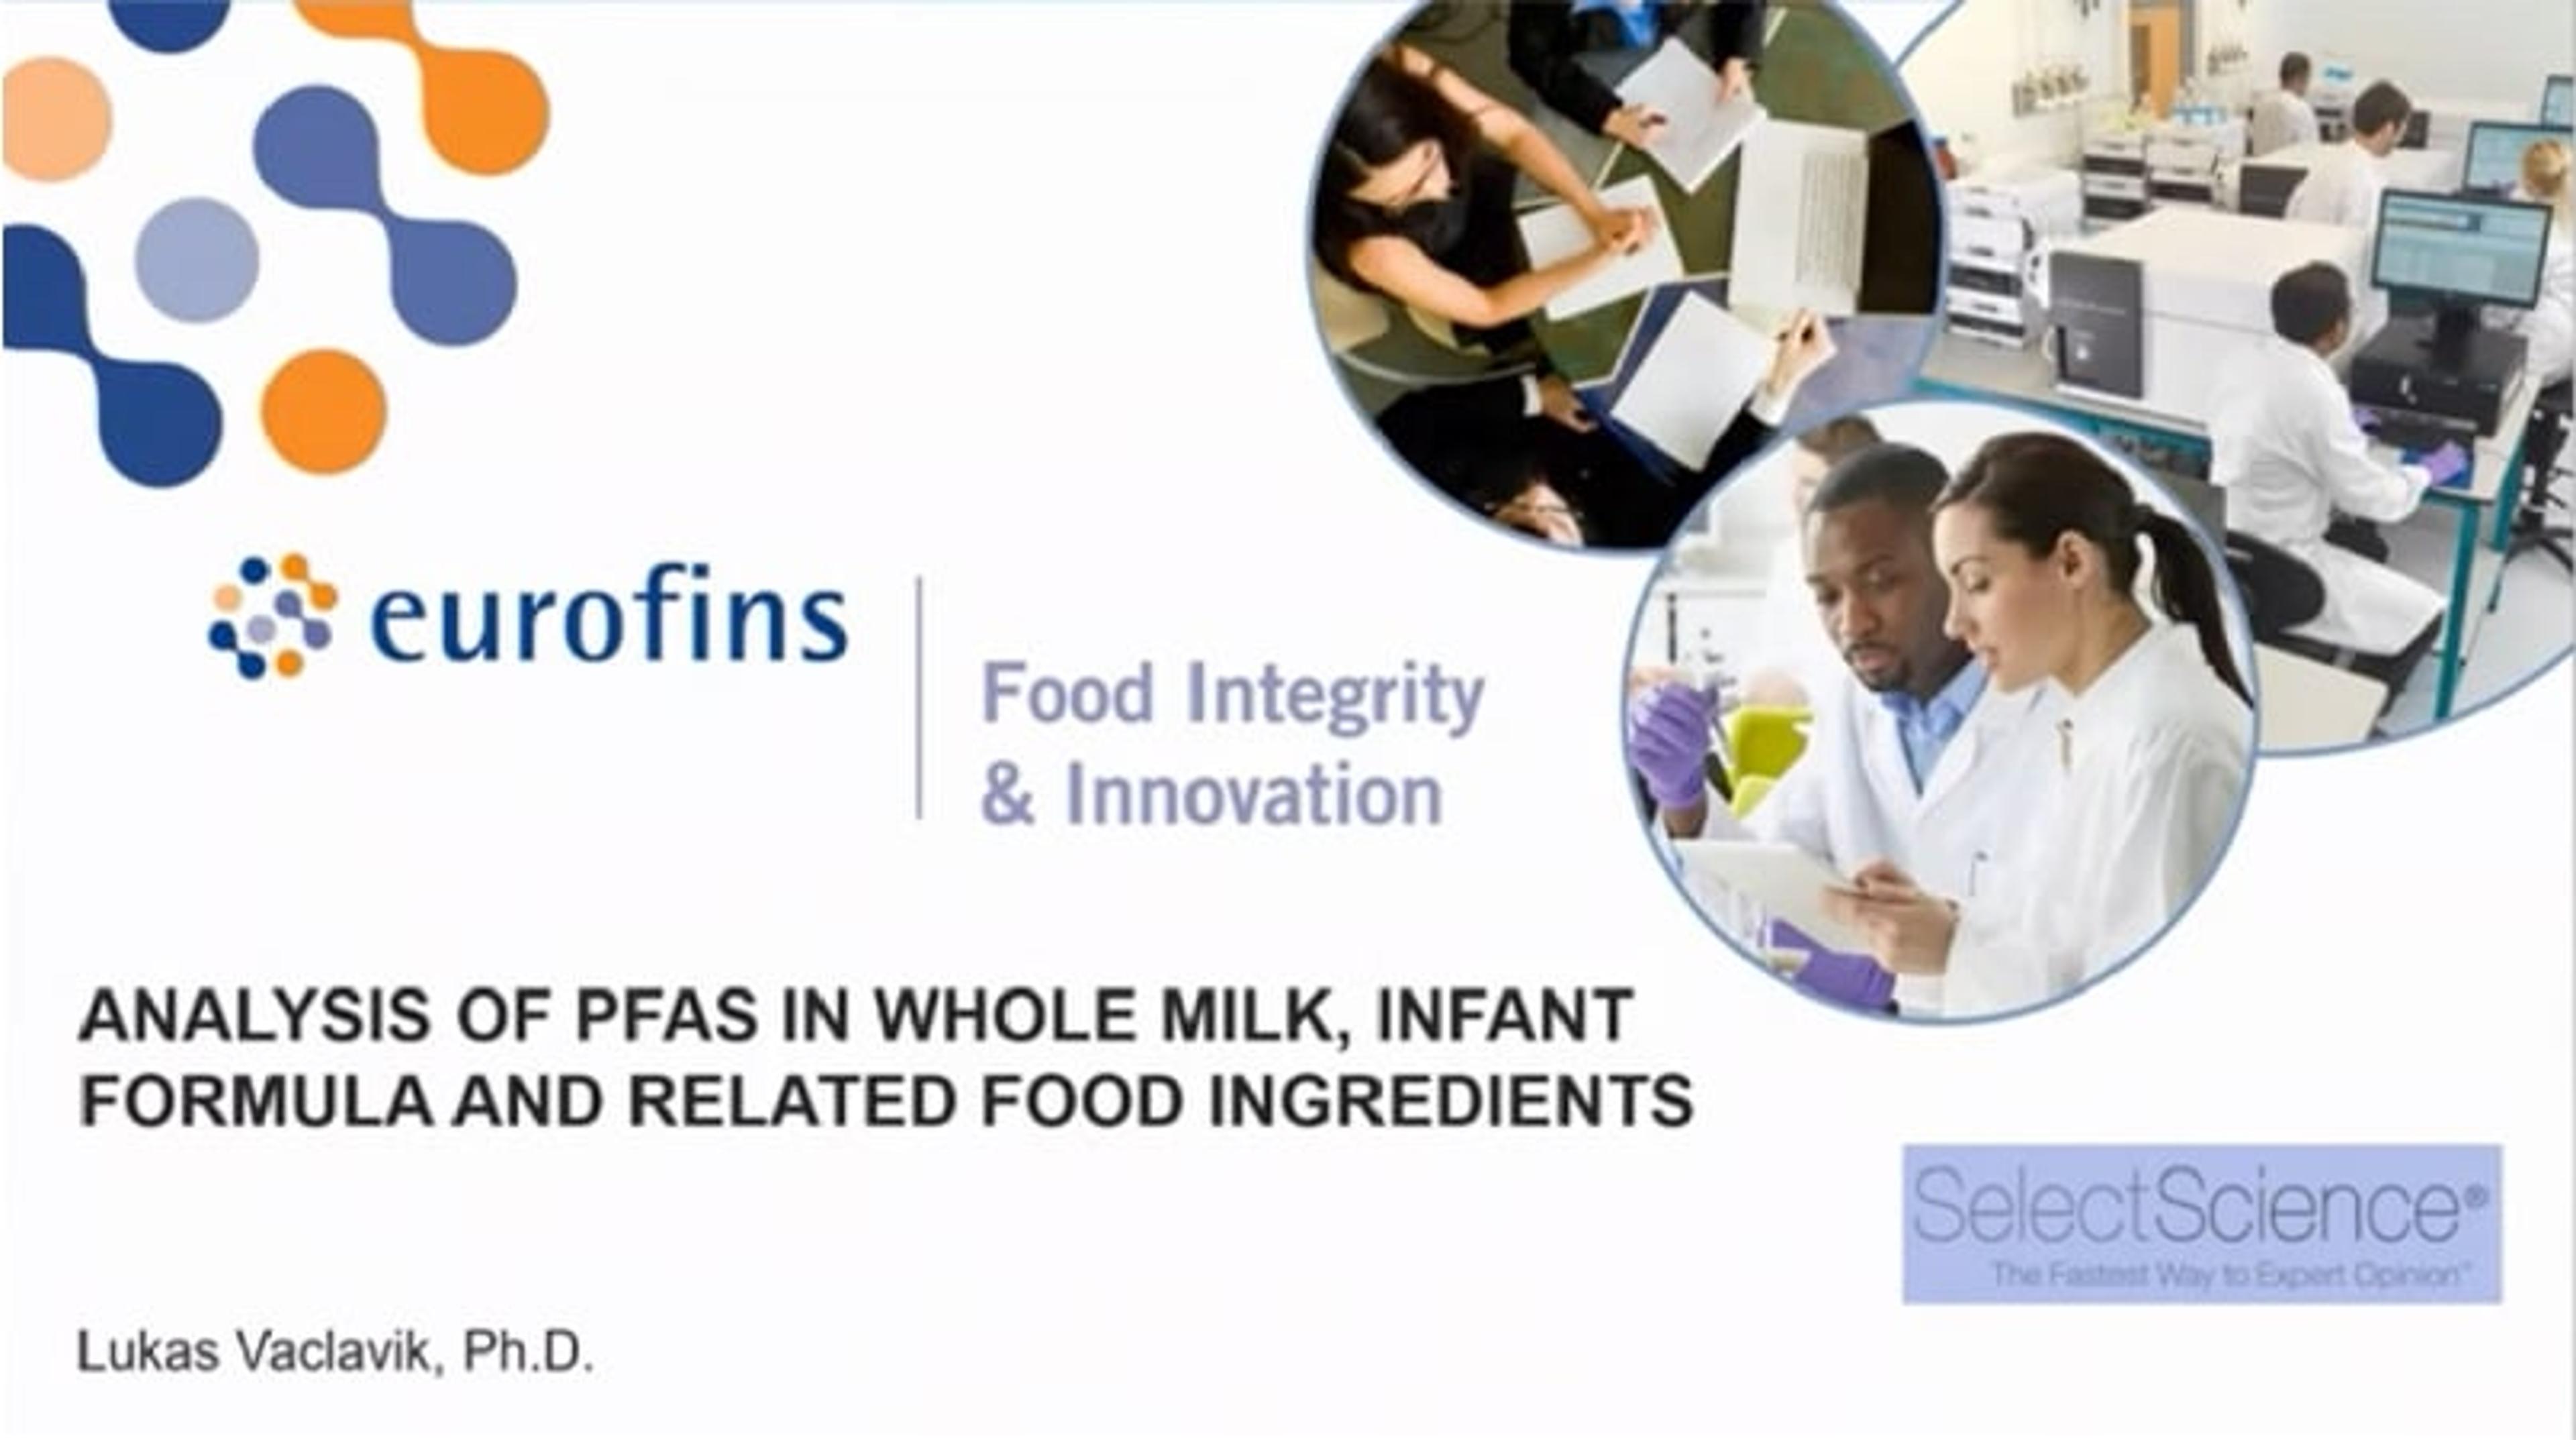 LC-MS/MS: The key to analyzing PFAS in milk, infant formula, and related food ingredients